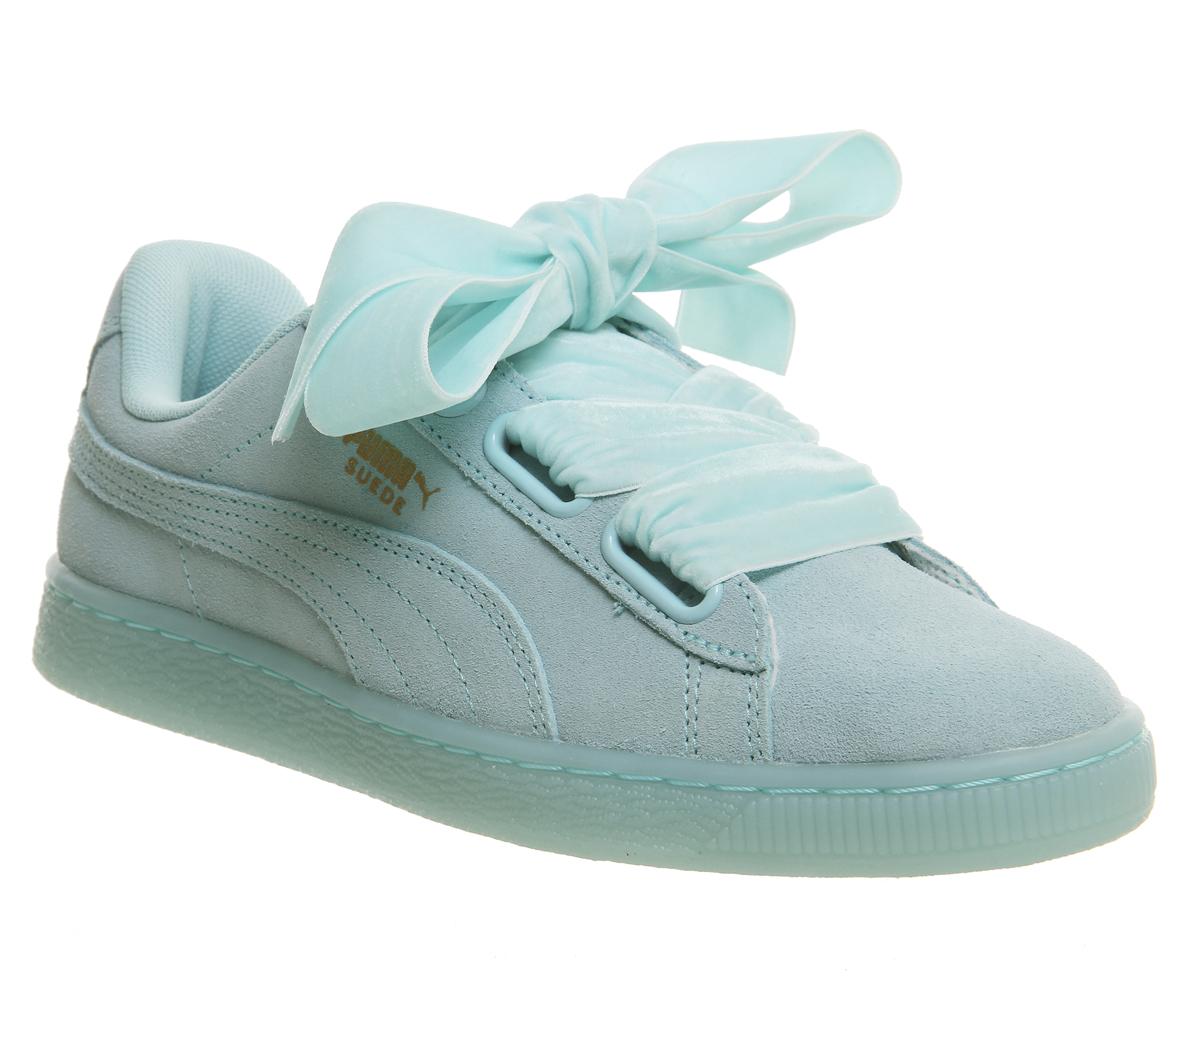 suede turquoise pumas